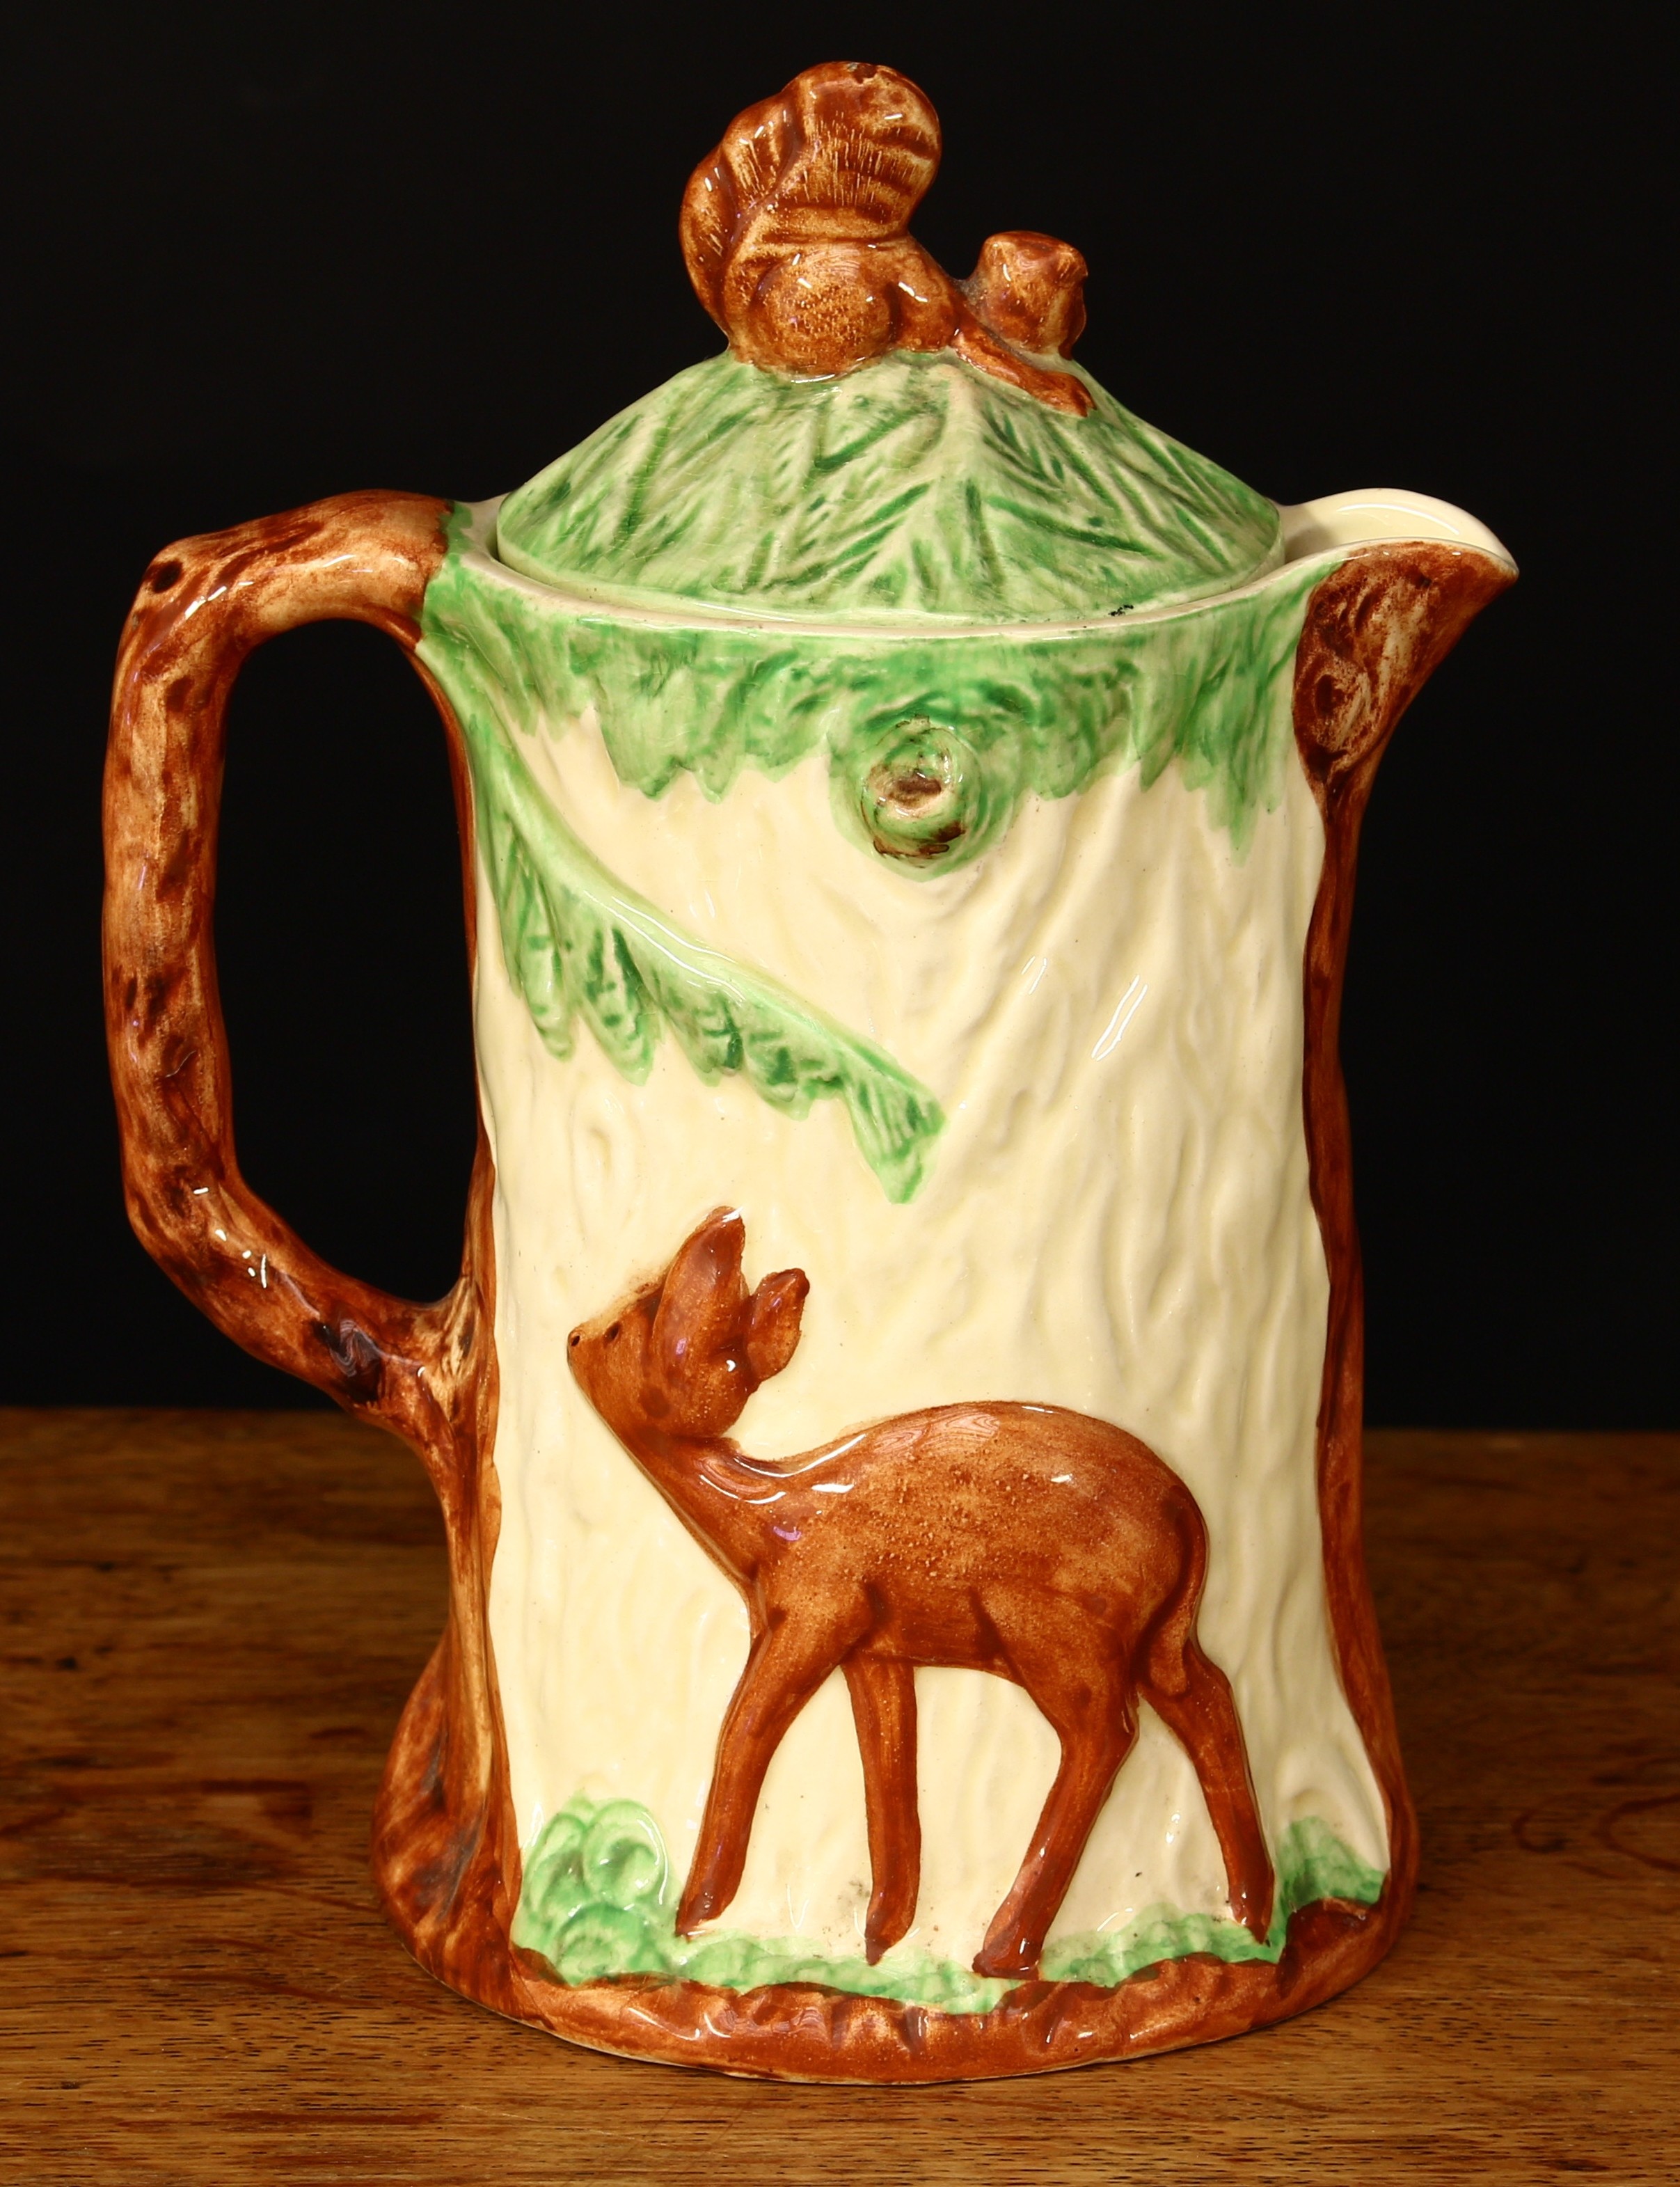 Juvenalia - a 1930's Wadeheath Walt Disney novelty hot water jug and cover from the Snow White - Image 2 of 3